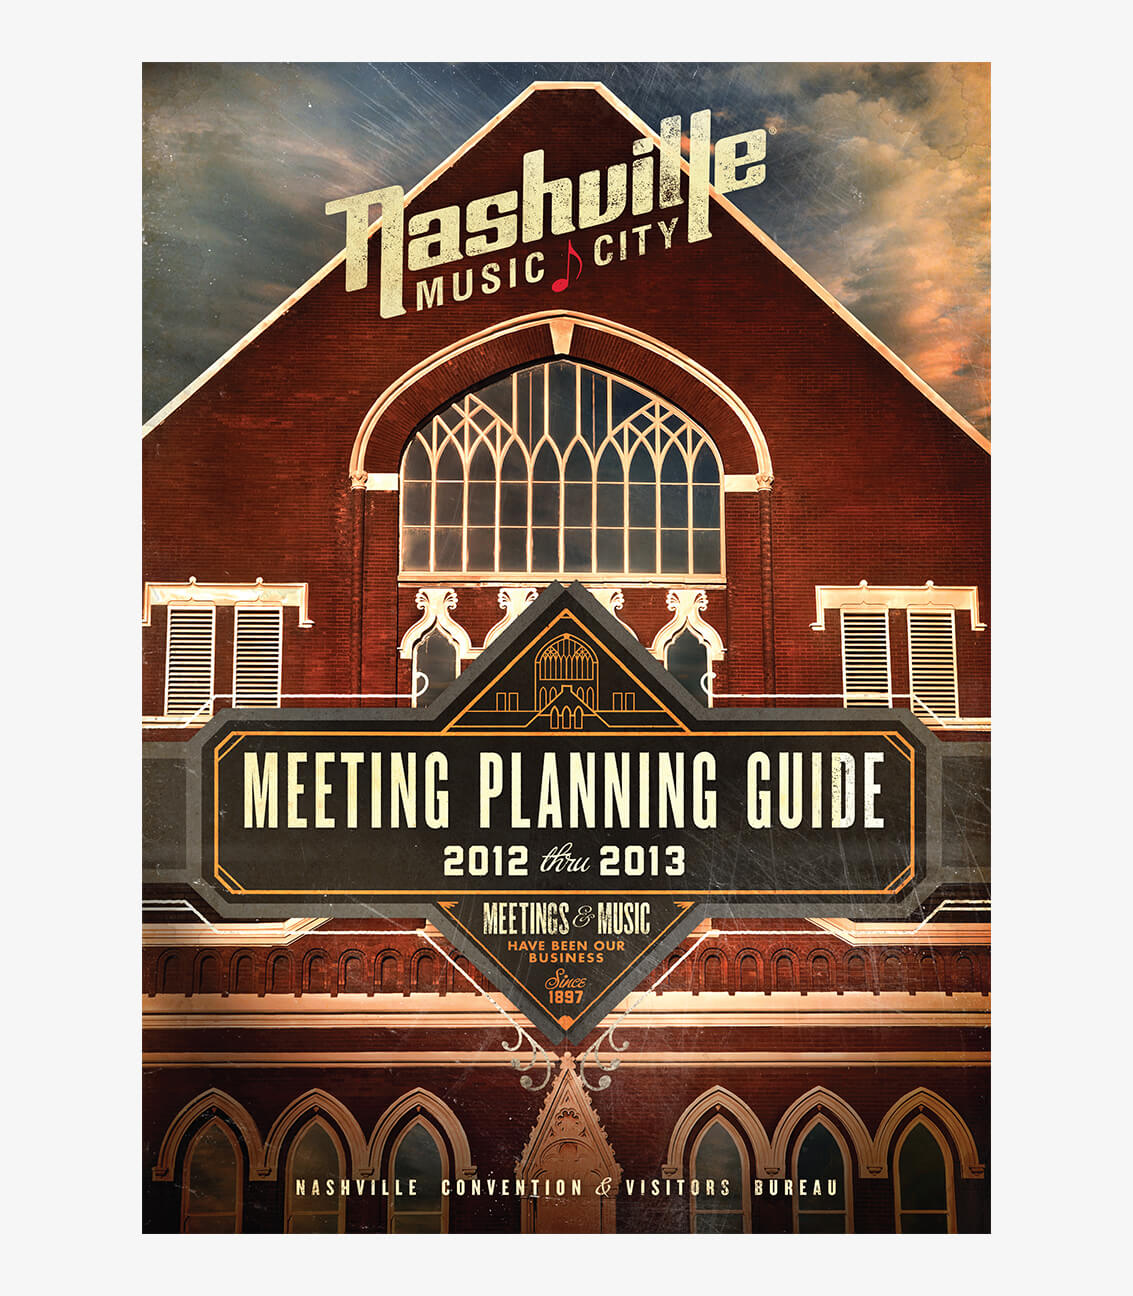 Magazine cover design for Nashville Conventions and Visitors Bureau in Nashville, Tennessee